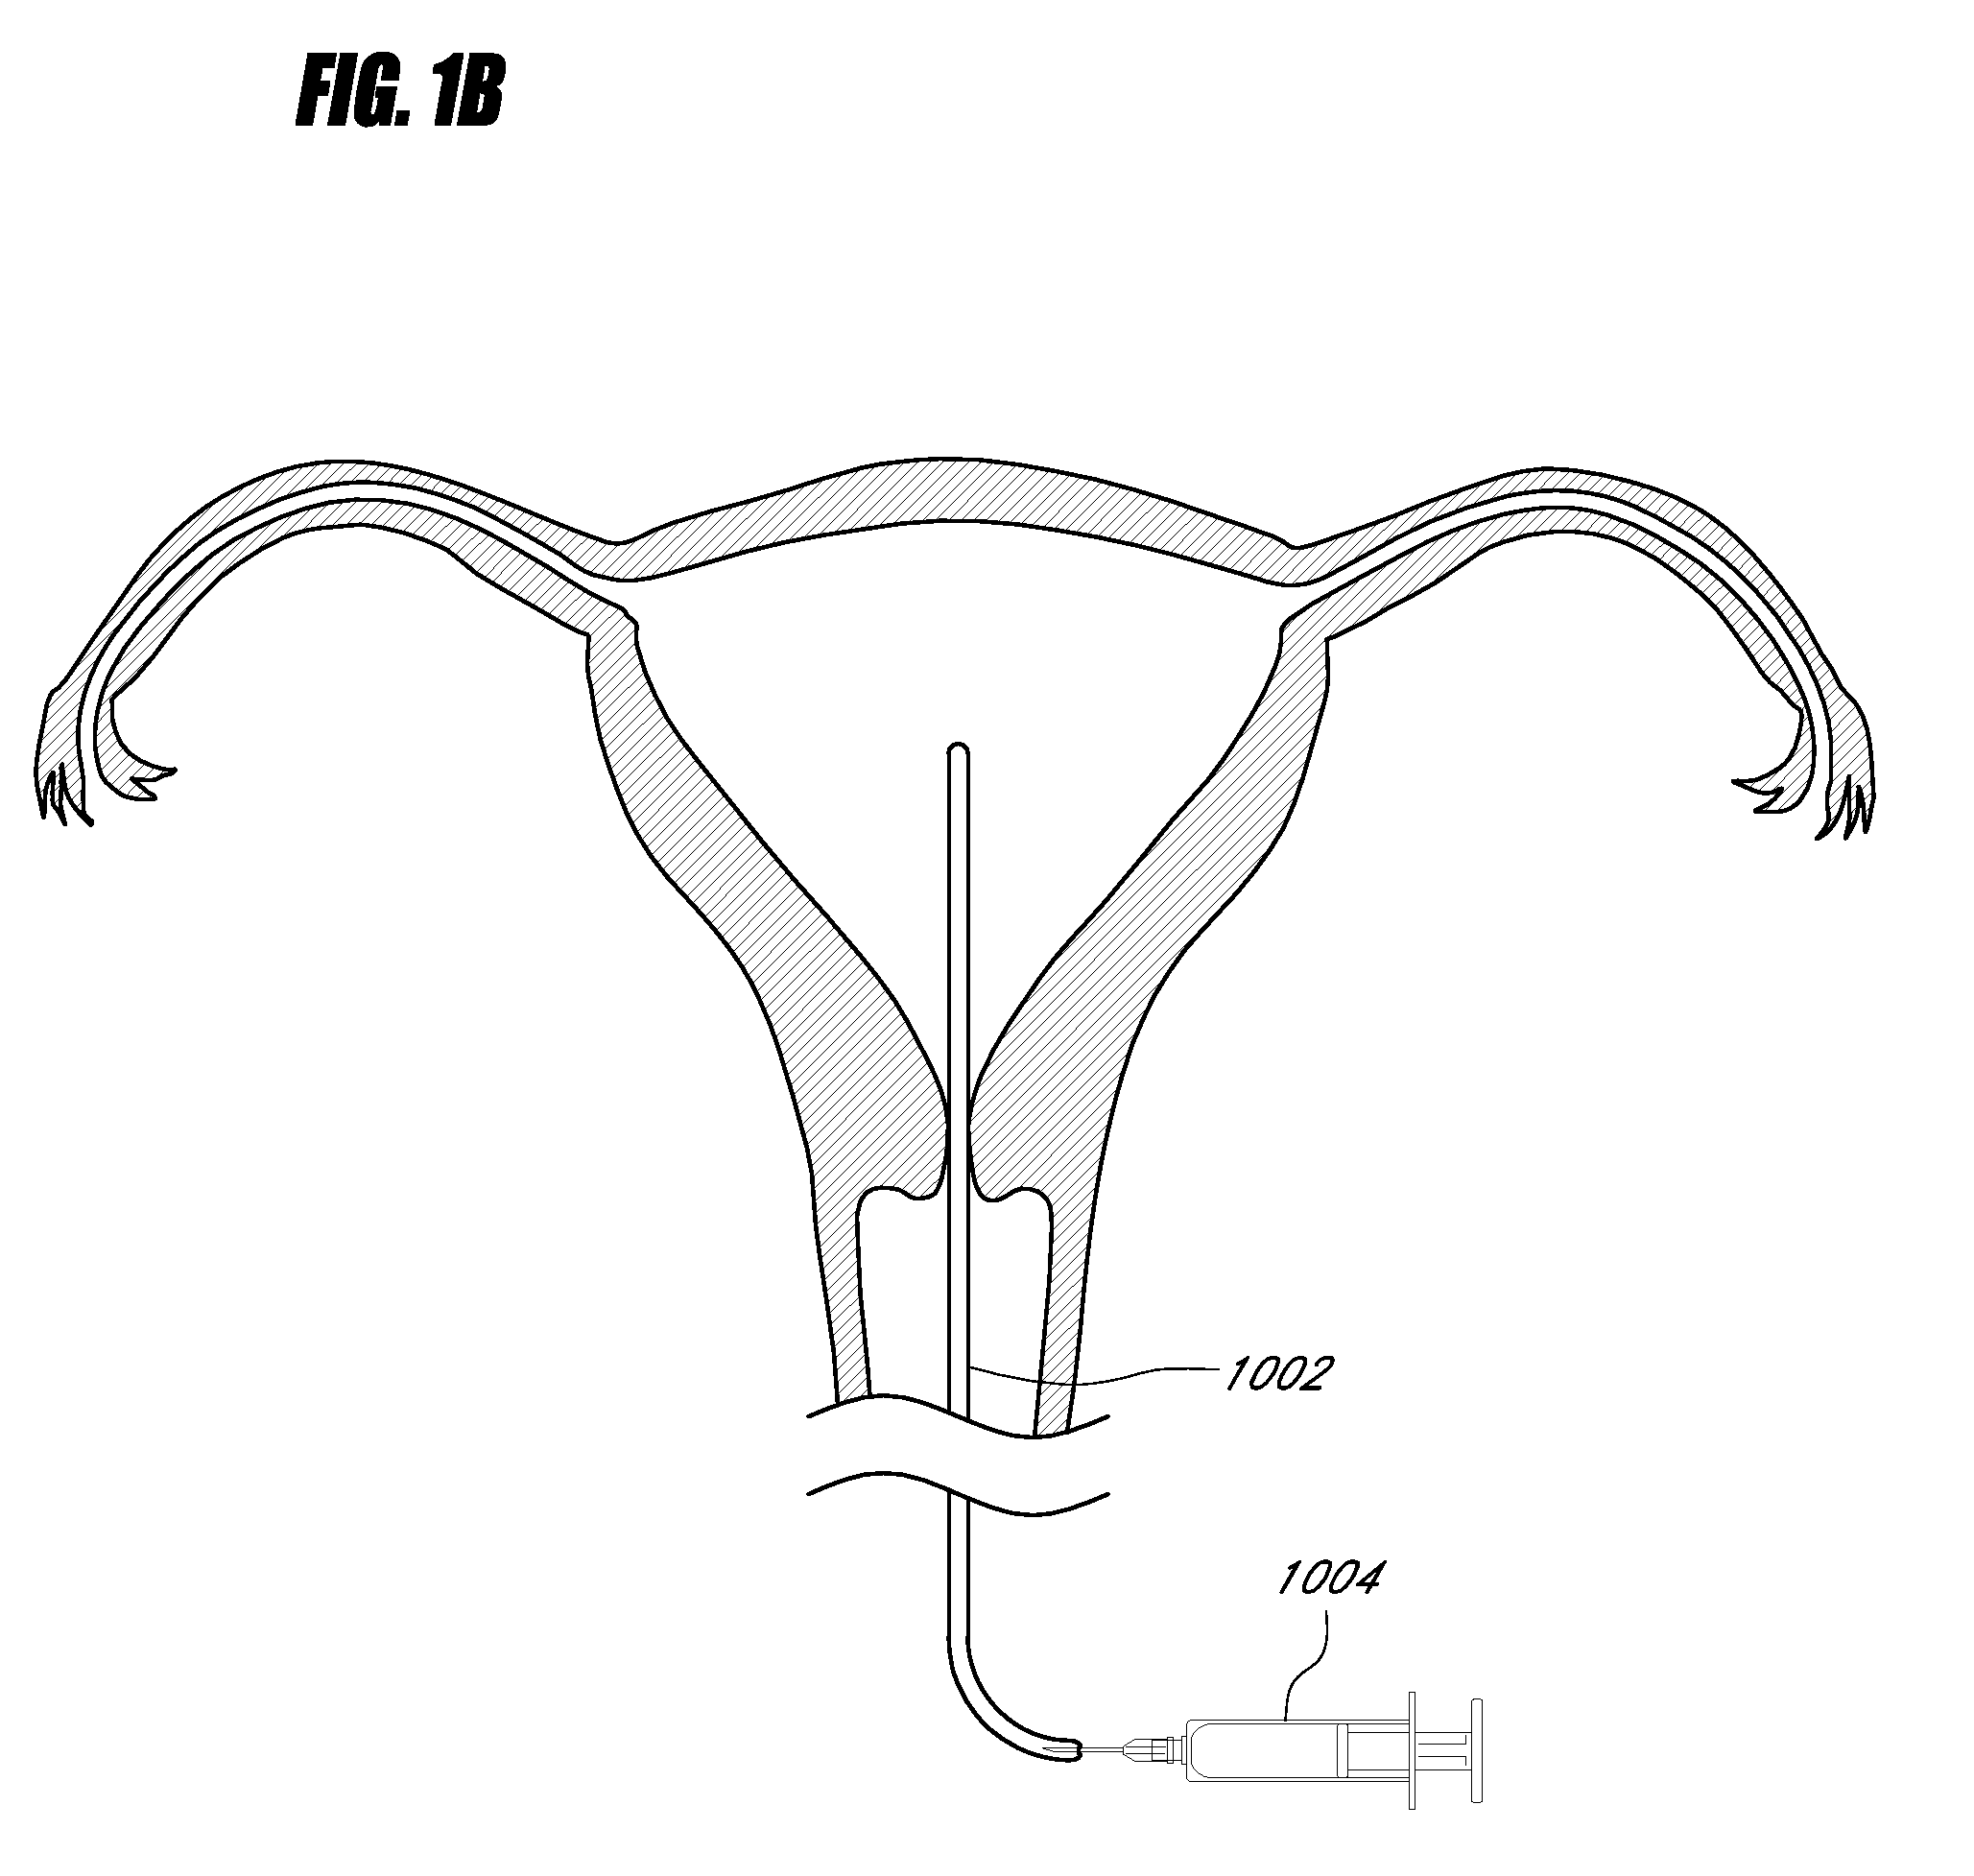 Systems, methods and devices for using a flowable medium for distending a hollow organ